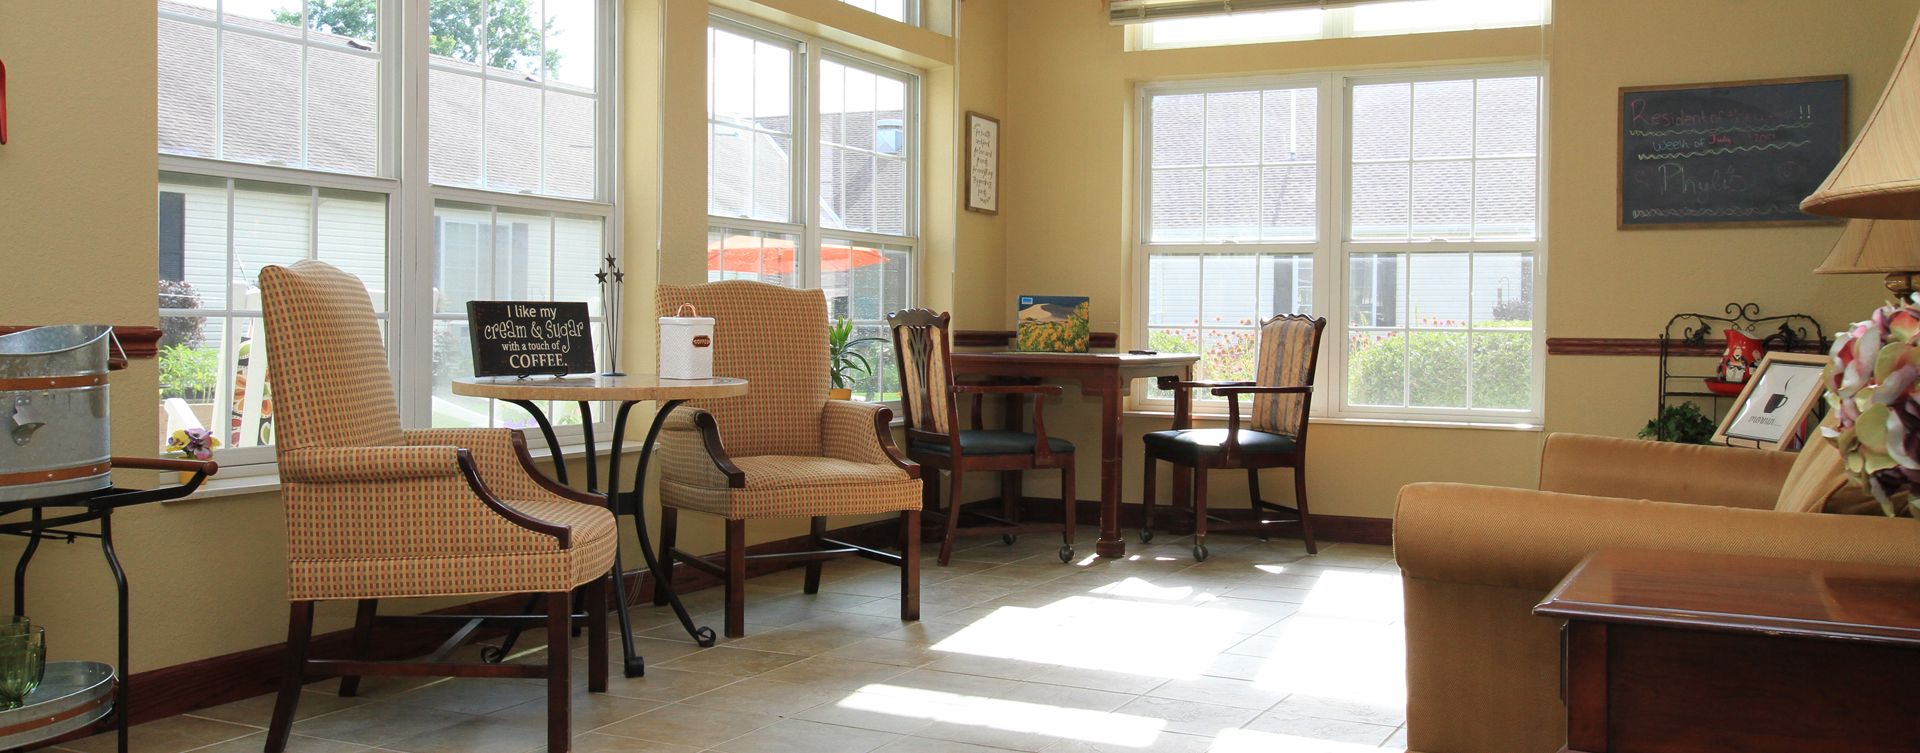 Curl up with a good book in the sunroom at Bickford of Saginaw Township